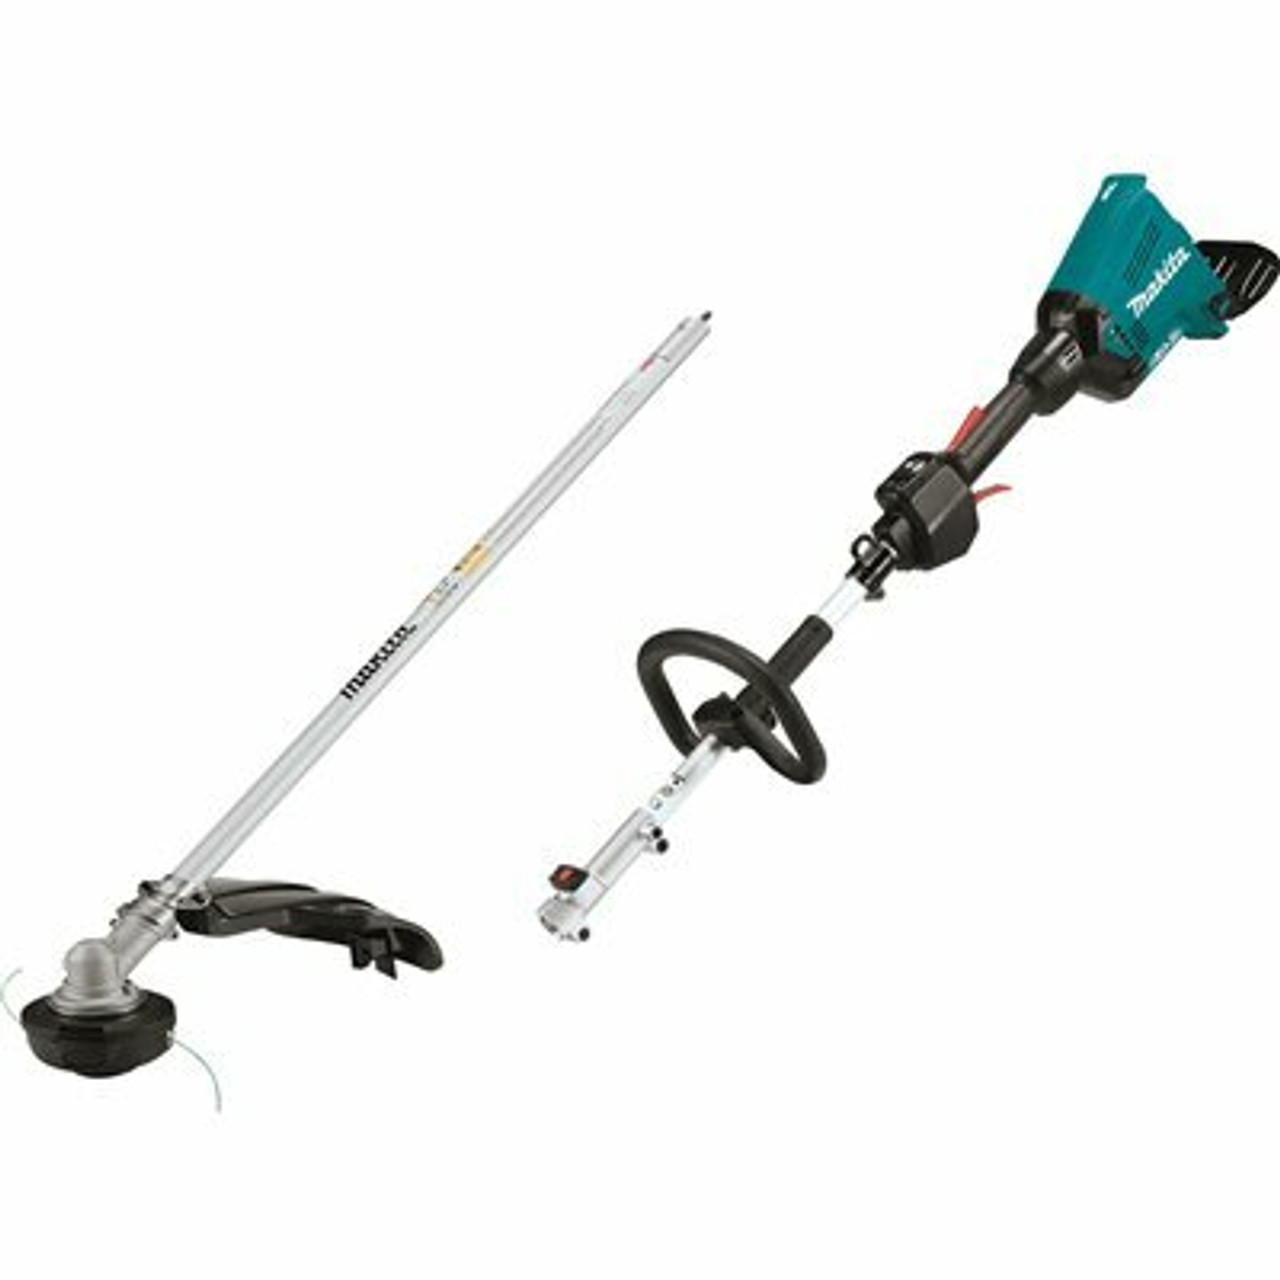 18-Volt X 2 (36-Volt) Lxt Lithium-Ion Brushless Cordless Couple Shaft Power Head W/String Trimmer Attachment (Tool Only)